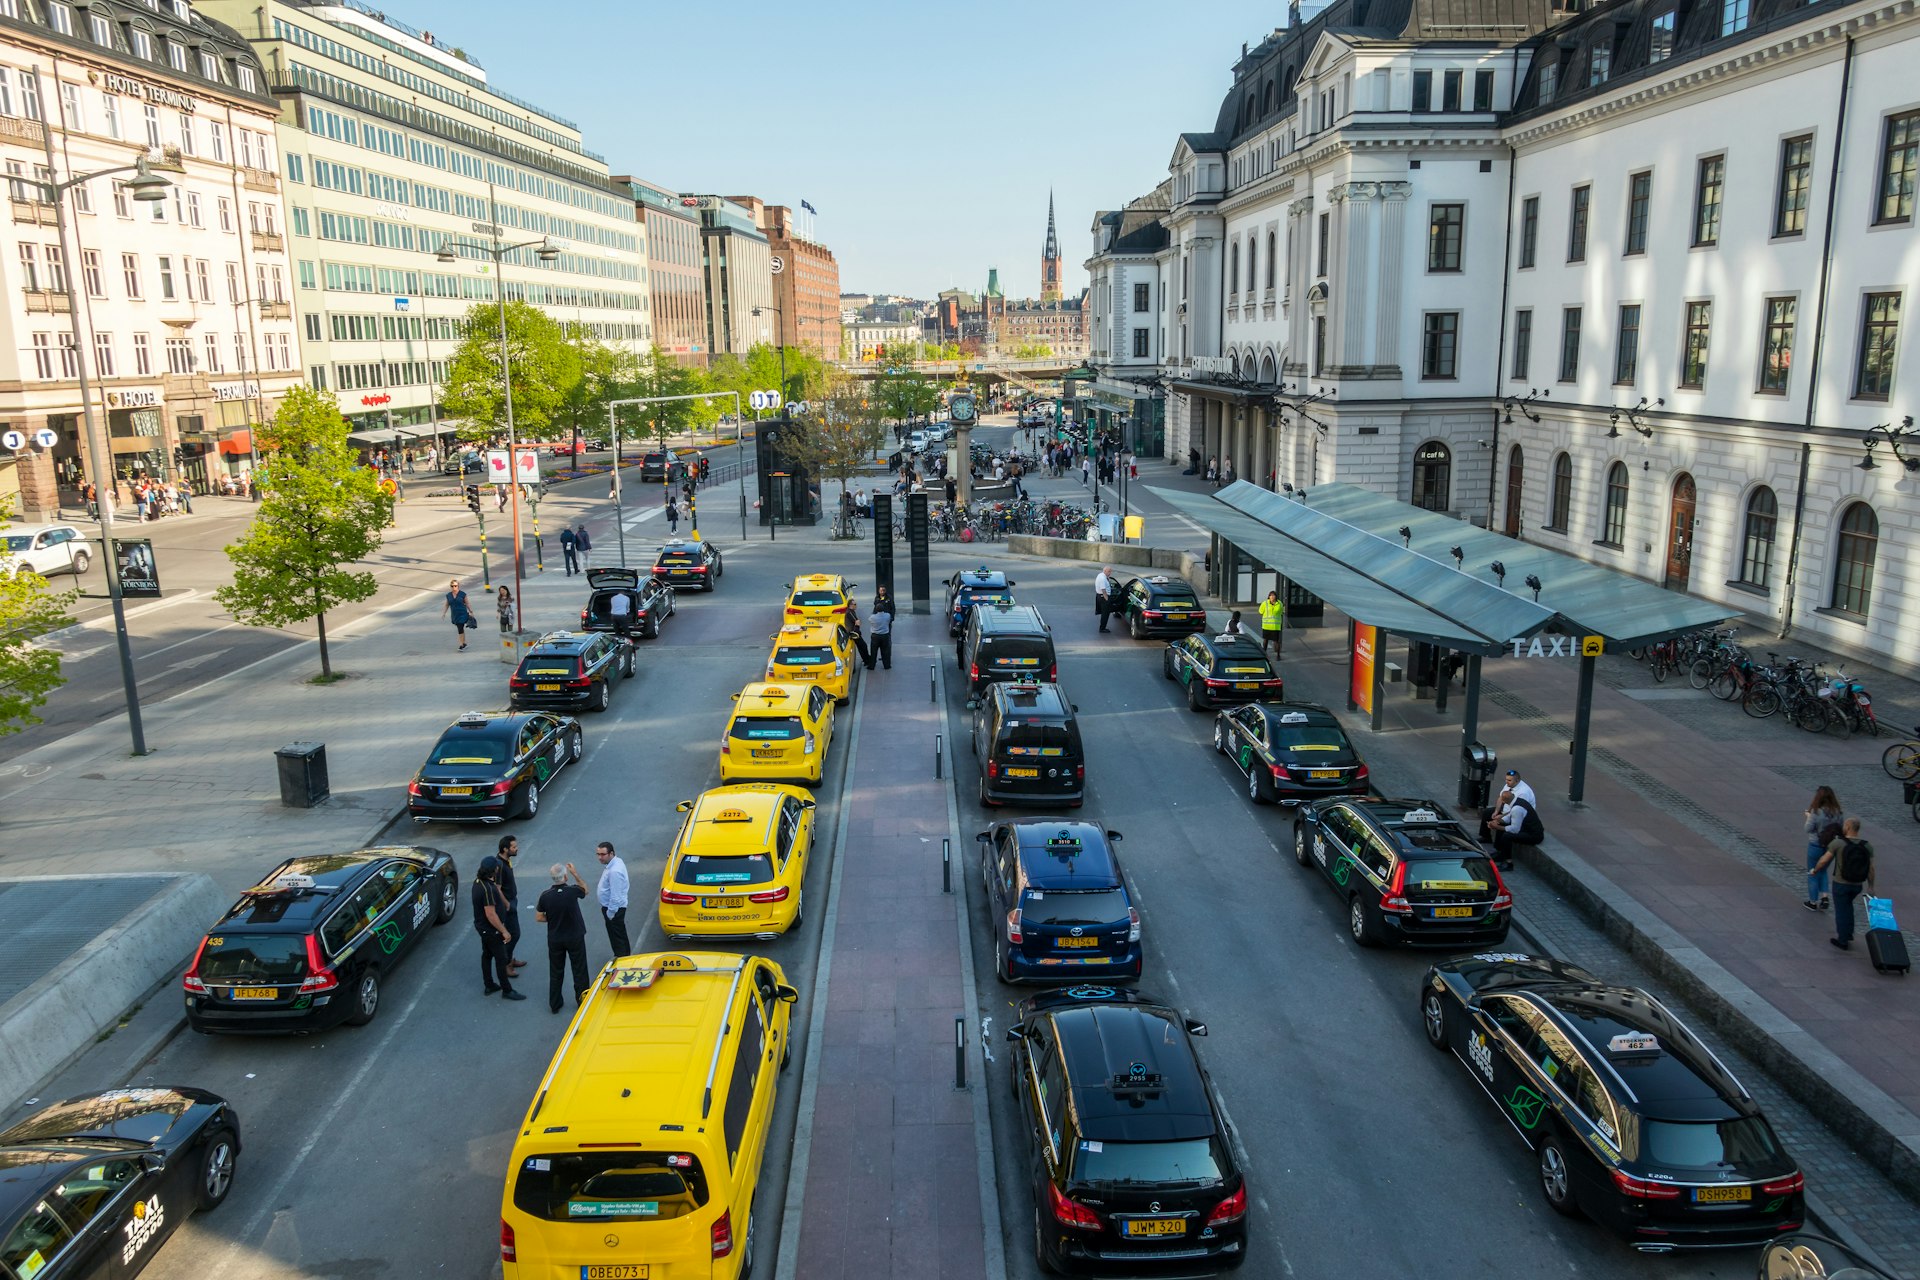 City view of many yellow and black taxis in line.